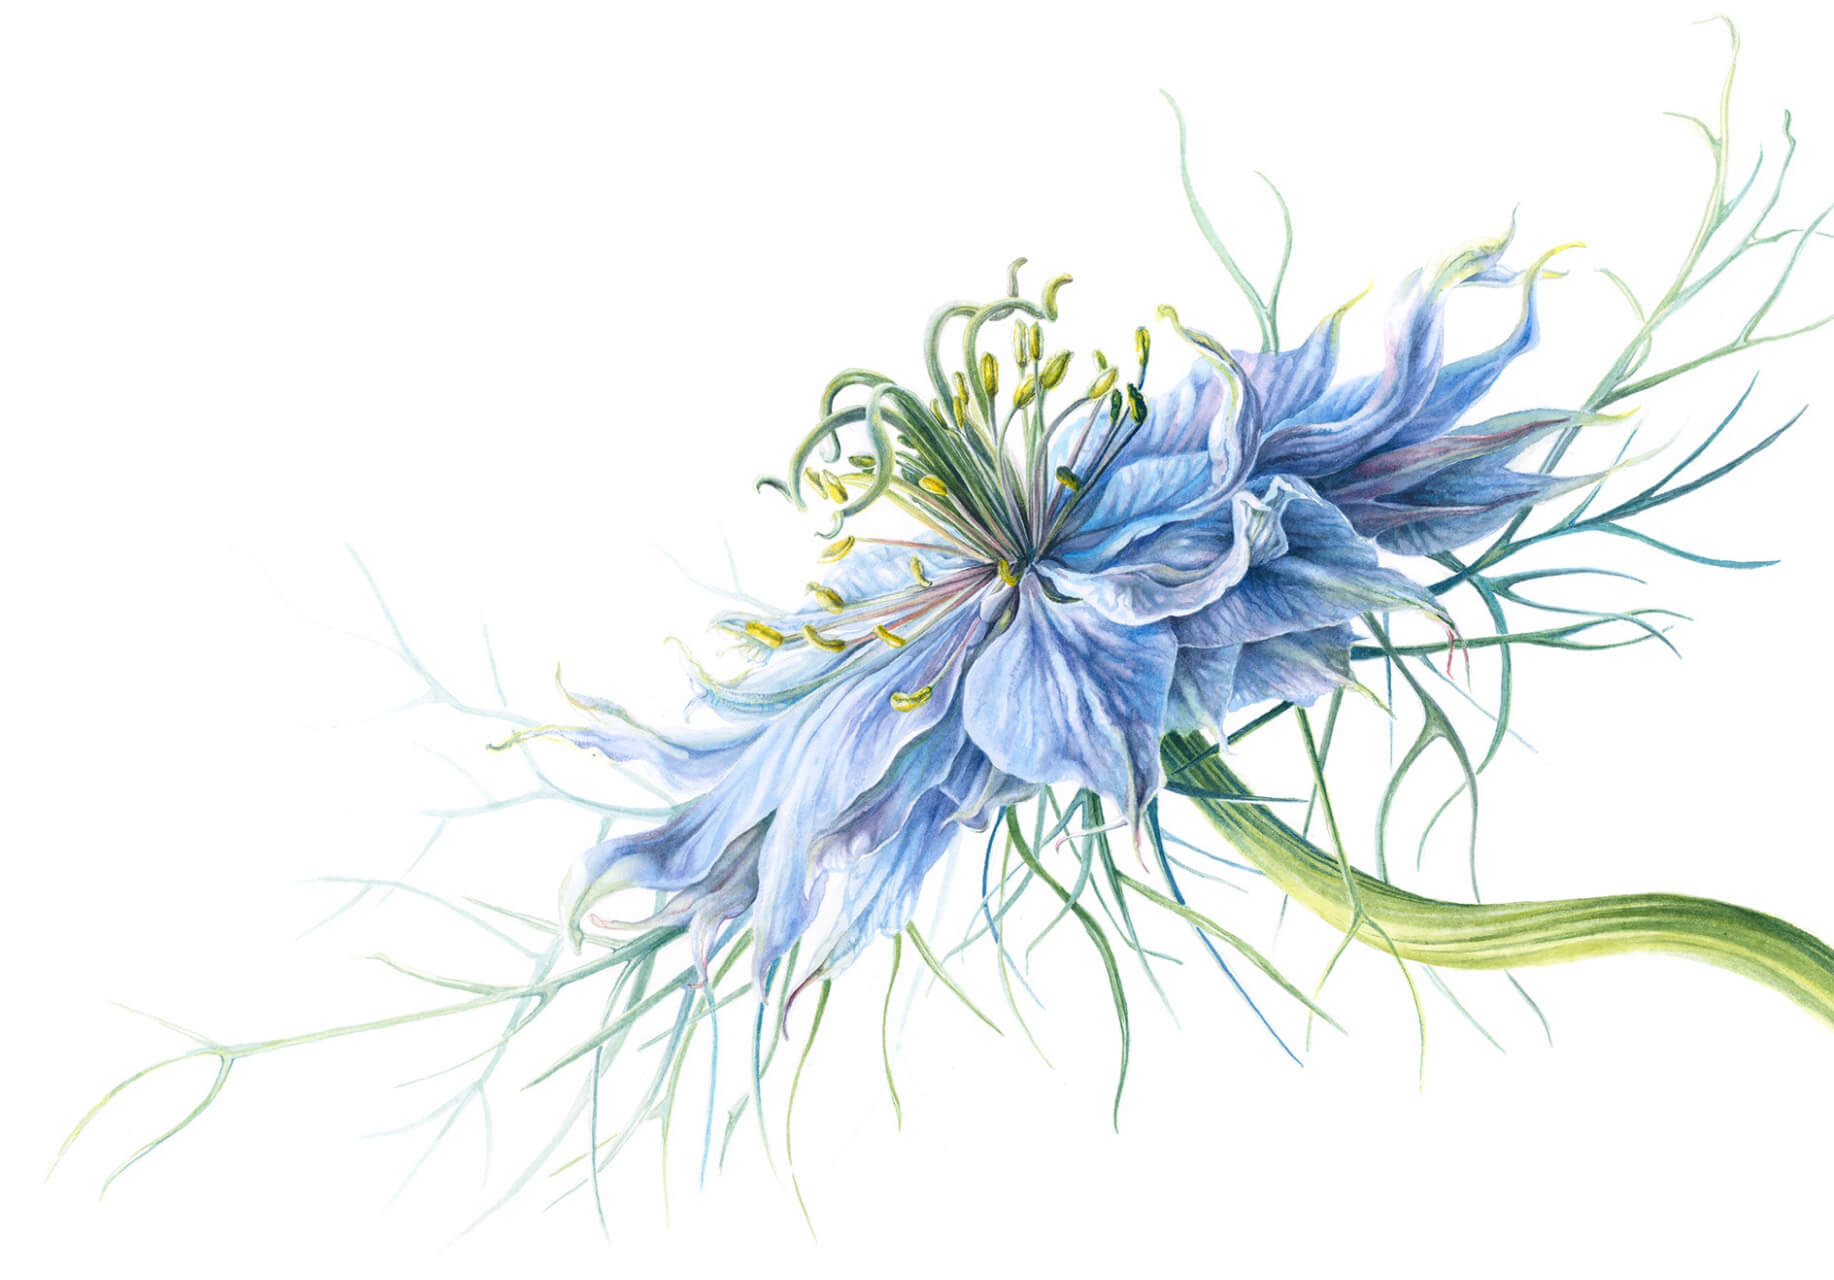 Blue cornflower illustration by Botanical Artist and tutor - Mary Dillion for atelier clos mirabel France.